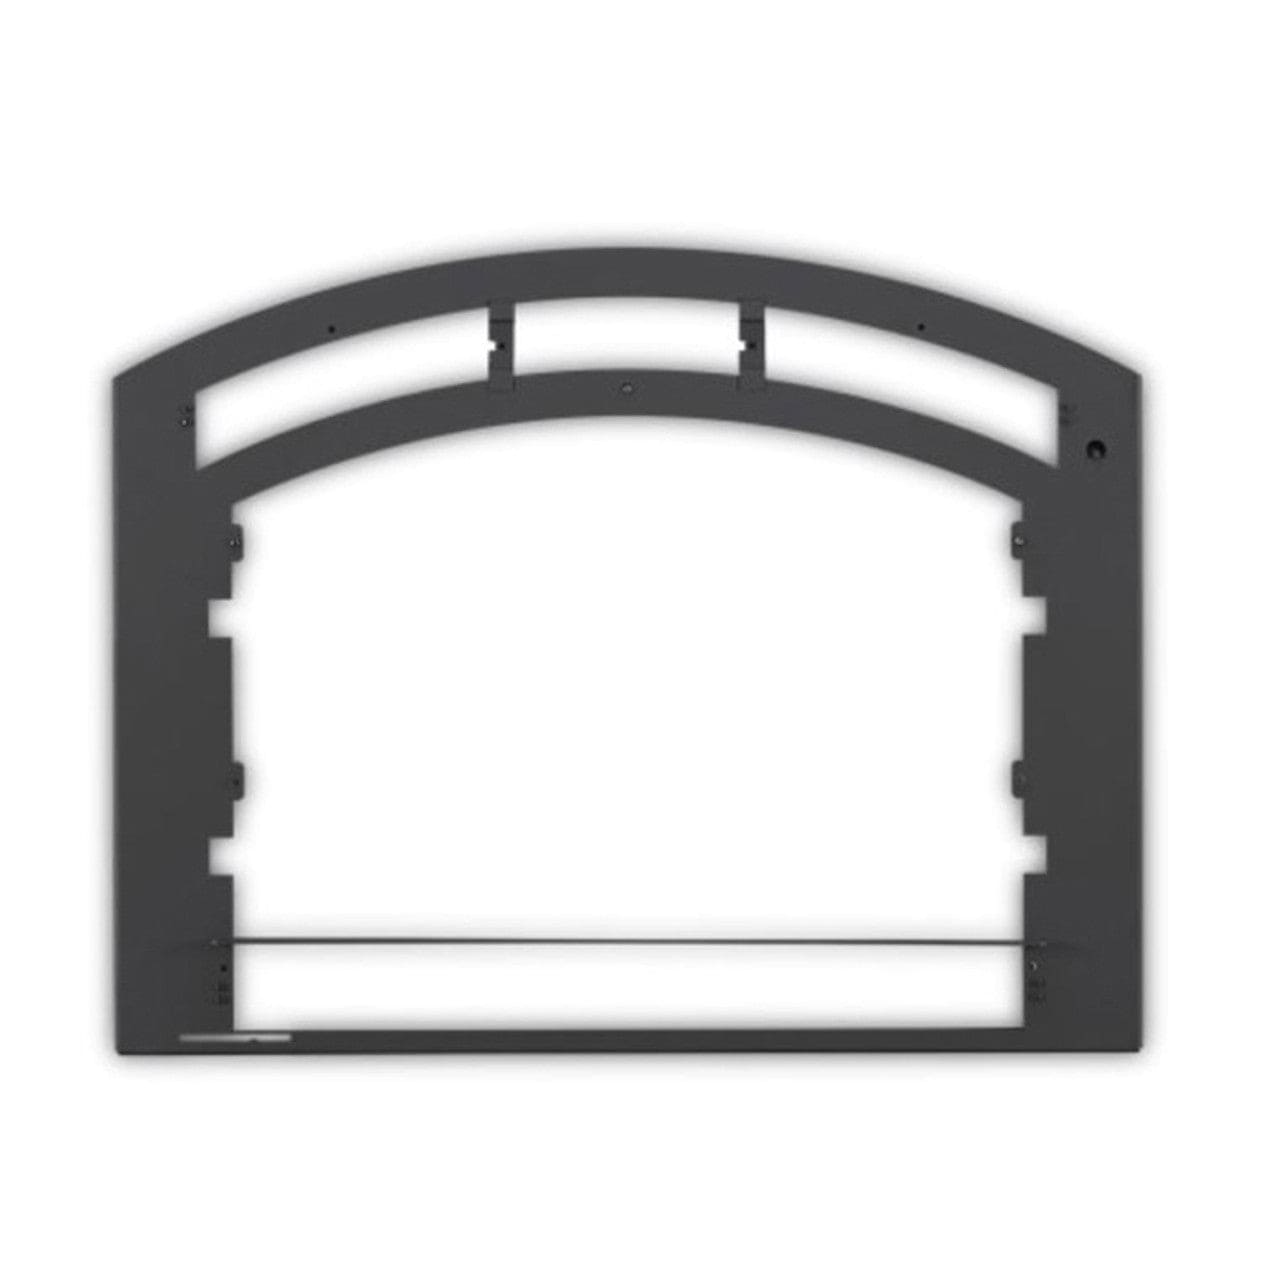 Arched Black Surround Faceplate for High Country 3000 - FPK3-H - Chimney Cricket